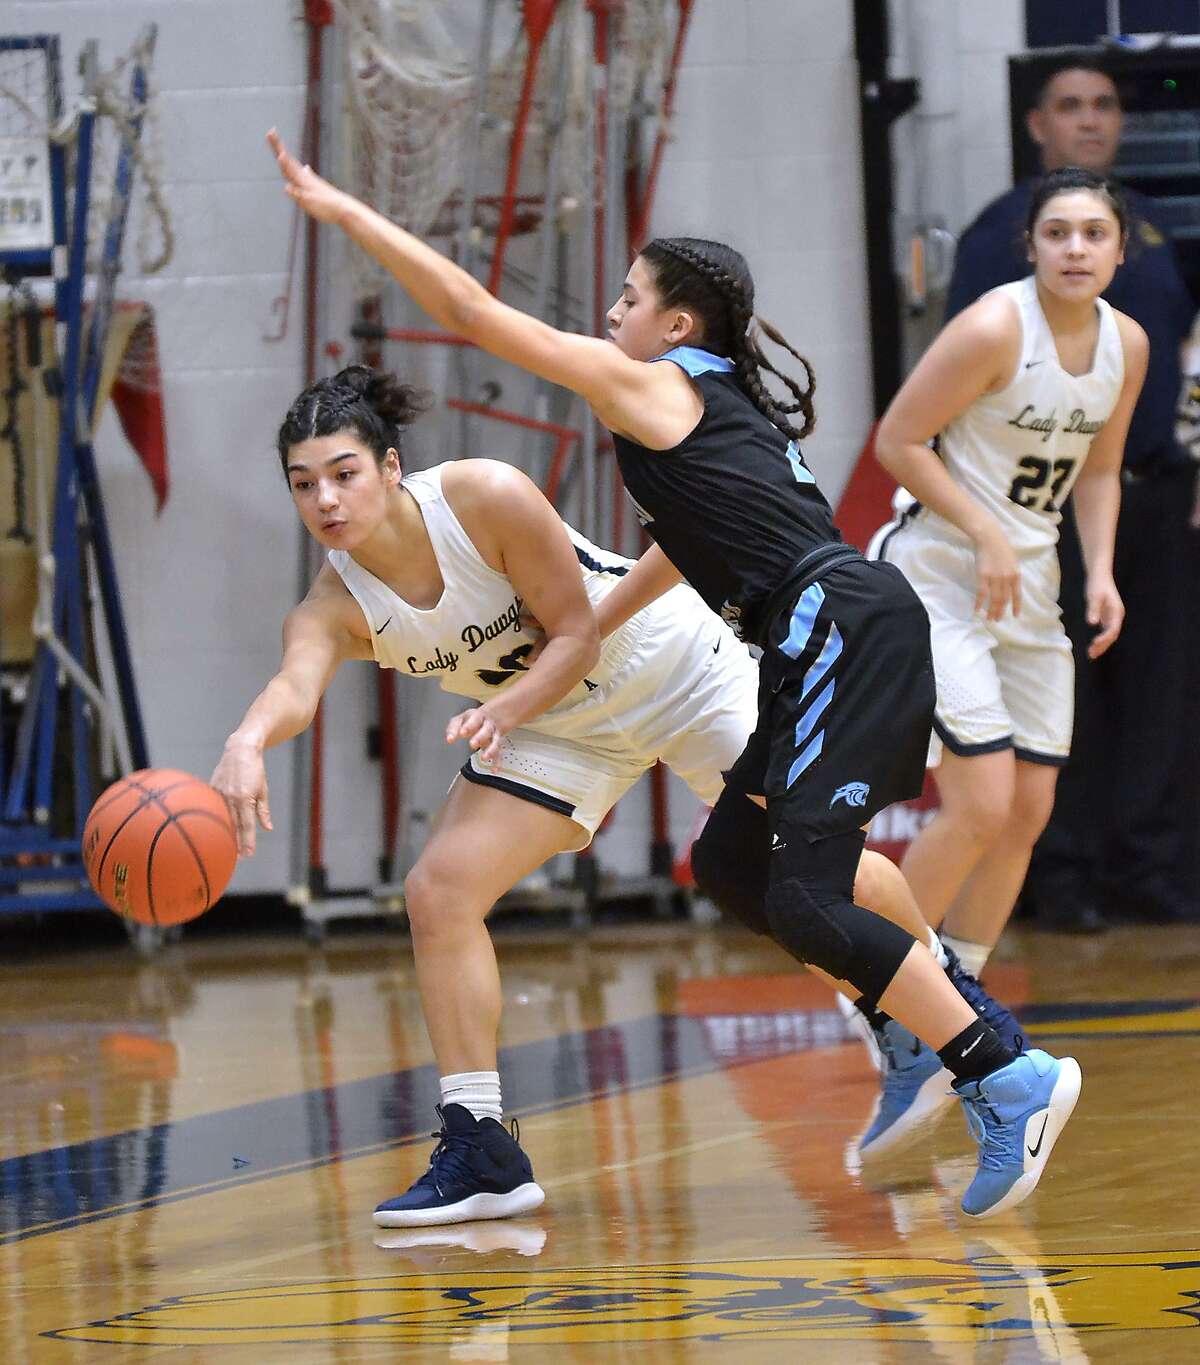 Joining United from Monday, Alexander and United South each advanced winning their respective first-round games Tuesday night. Aly Benavides and the Lady Bulldogs won 63-30 over PSJA while Angelina Lopez and the Lady Panthers prevailed 62-58 against McAllen Memorial.